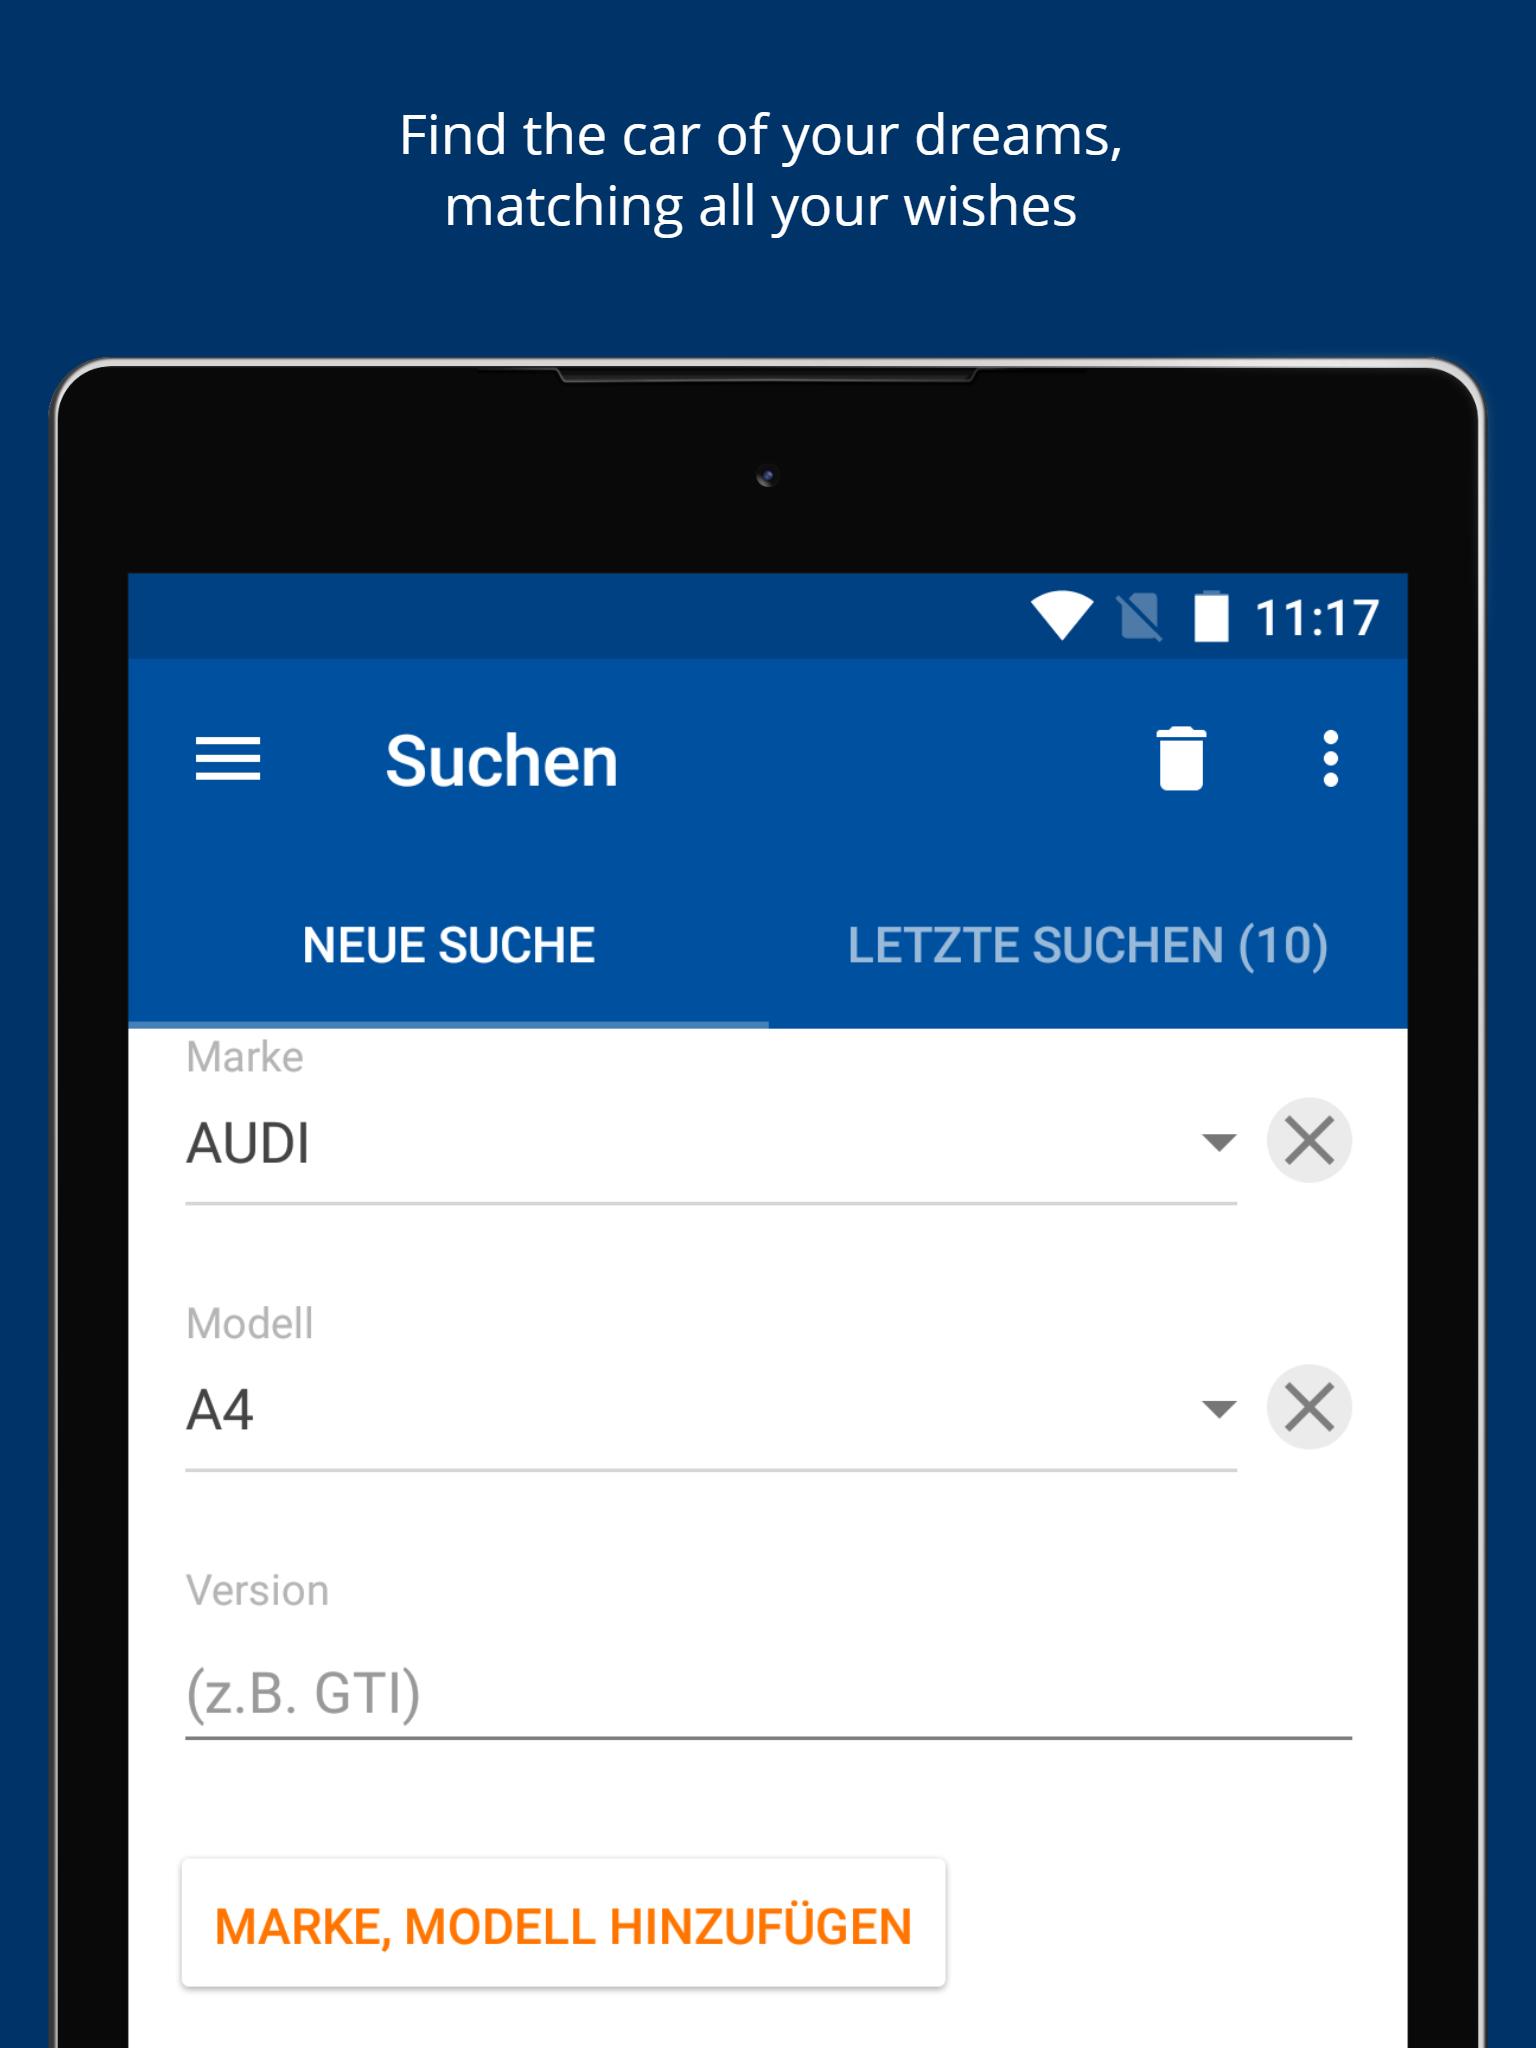 AutoScout24 Switzerland – Find your new car 4.0.0 Screenshot 9